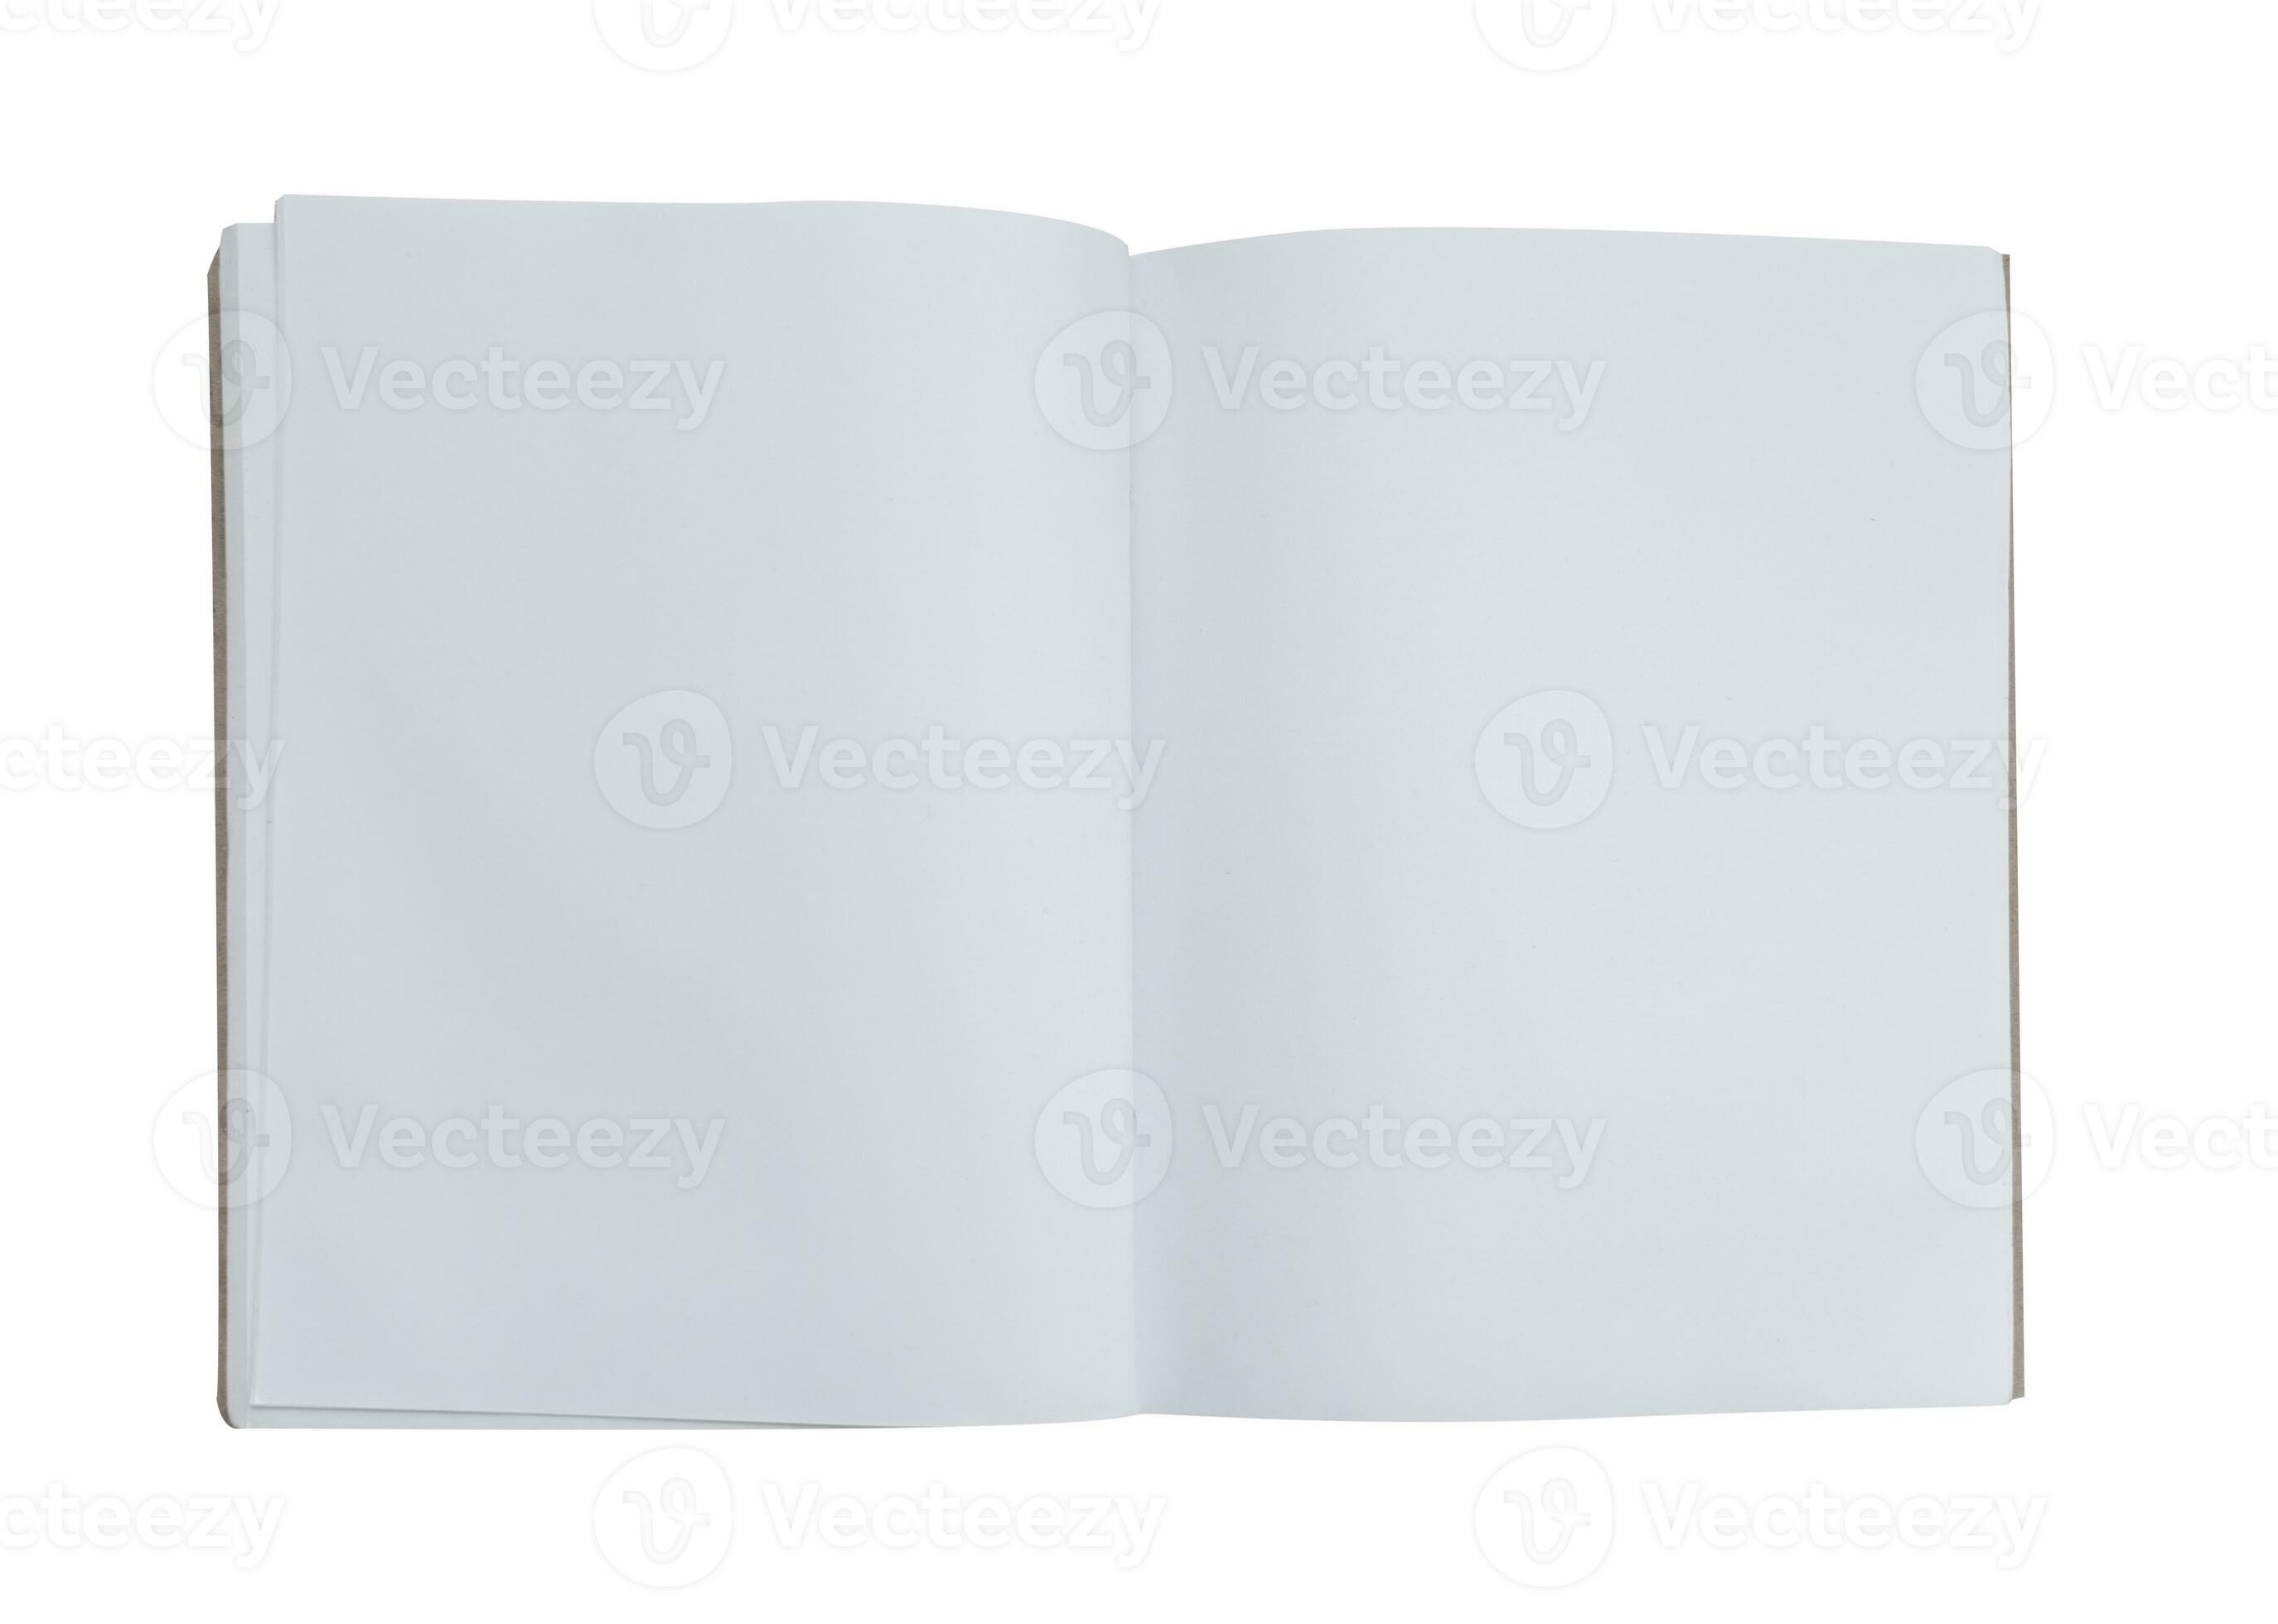 Hand Opening White Journal with Blank Pages Mockup. Stock Image